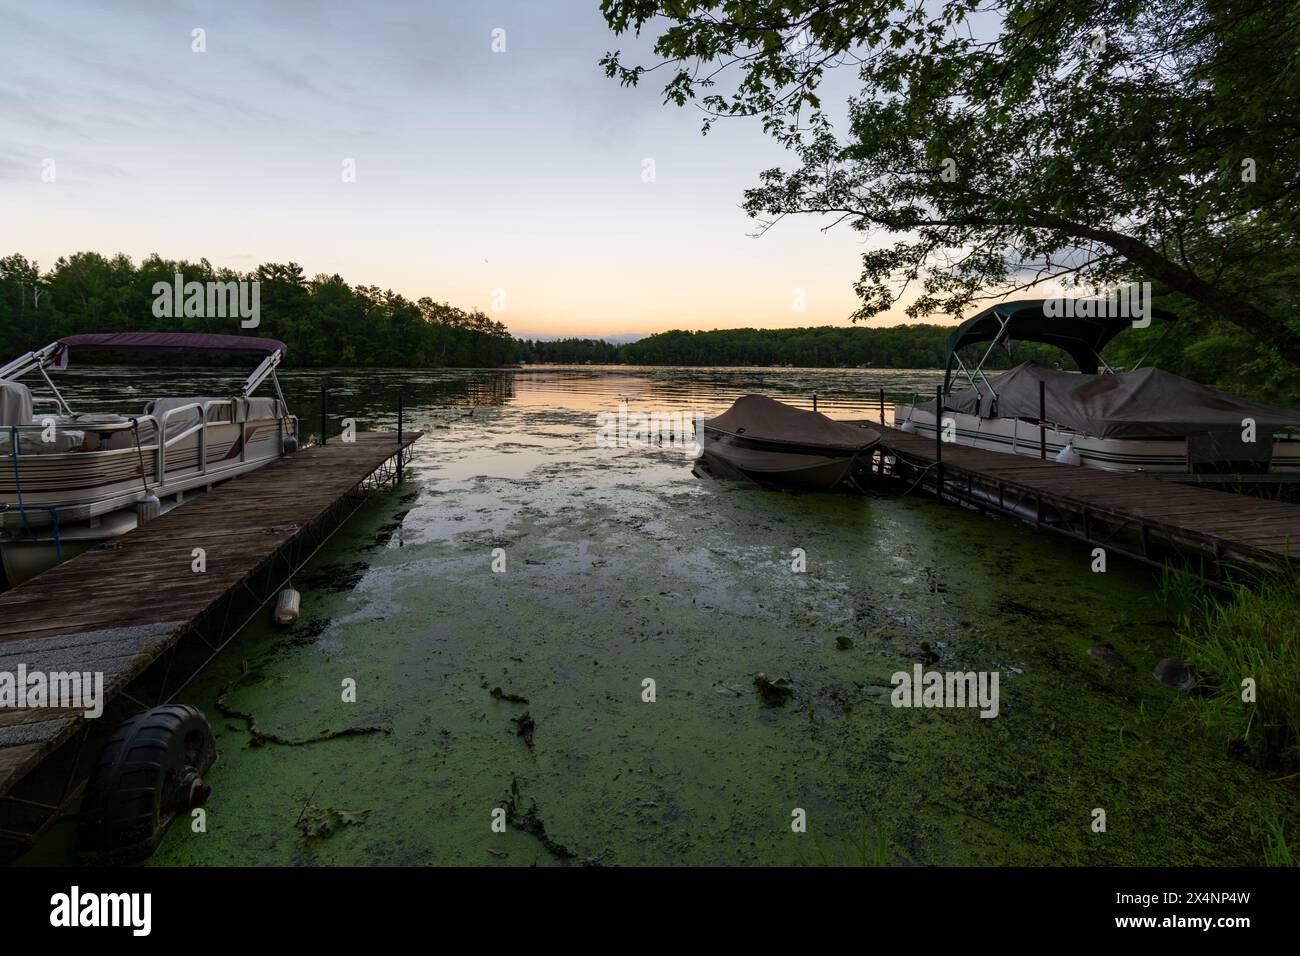 Looking out onto a northern Wisconsin lake in the evening with two pontoon boats moored for the evening. Stock Photo